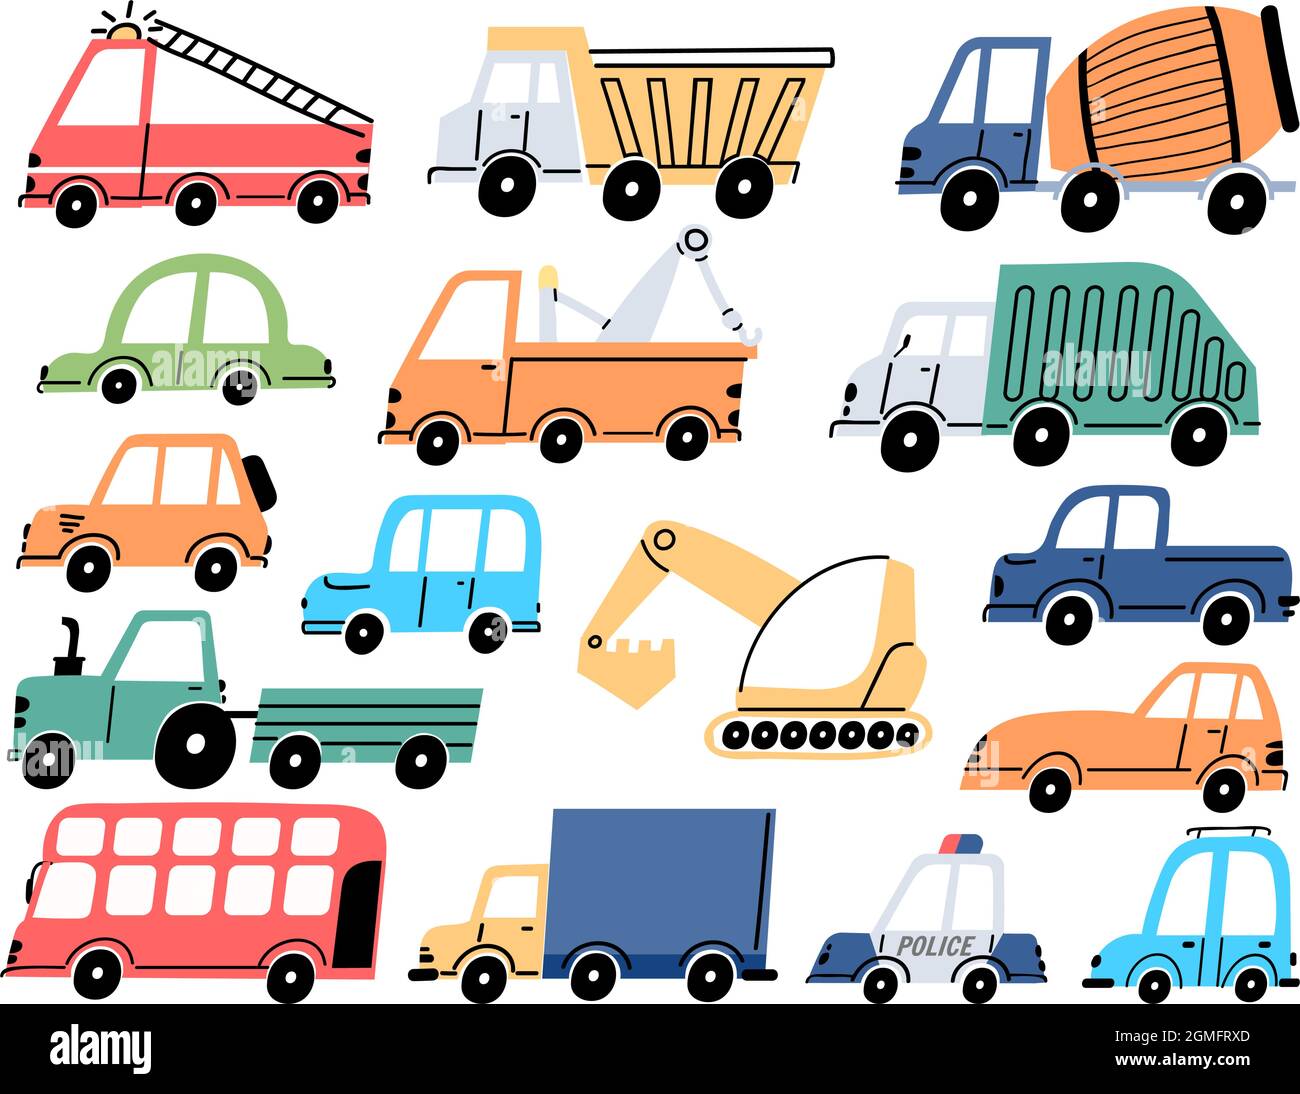 Kids transport and cars, construction tractor, excavator and digger. Cartoon children fire engine, dump truck and police vehicle vector set Stock Vector